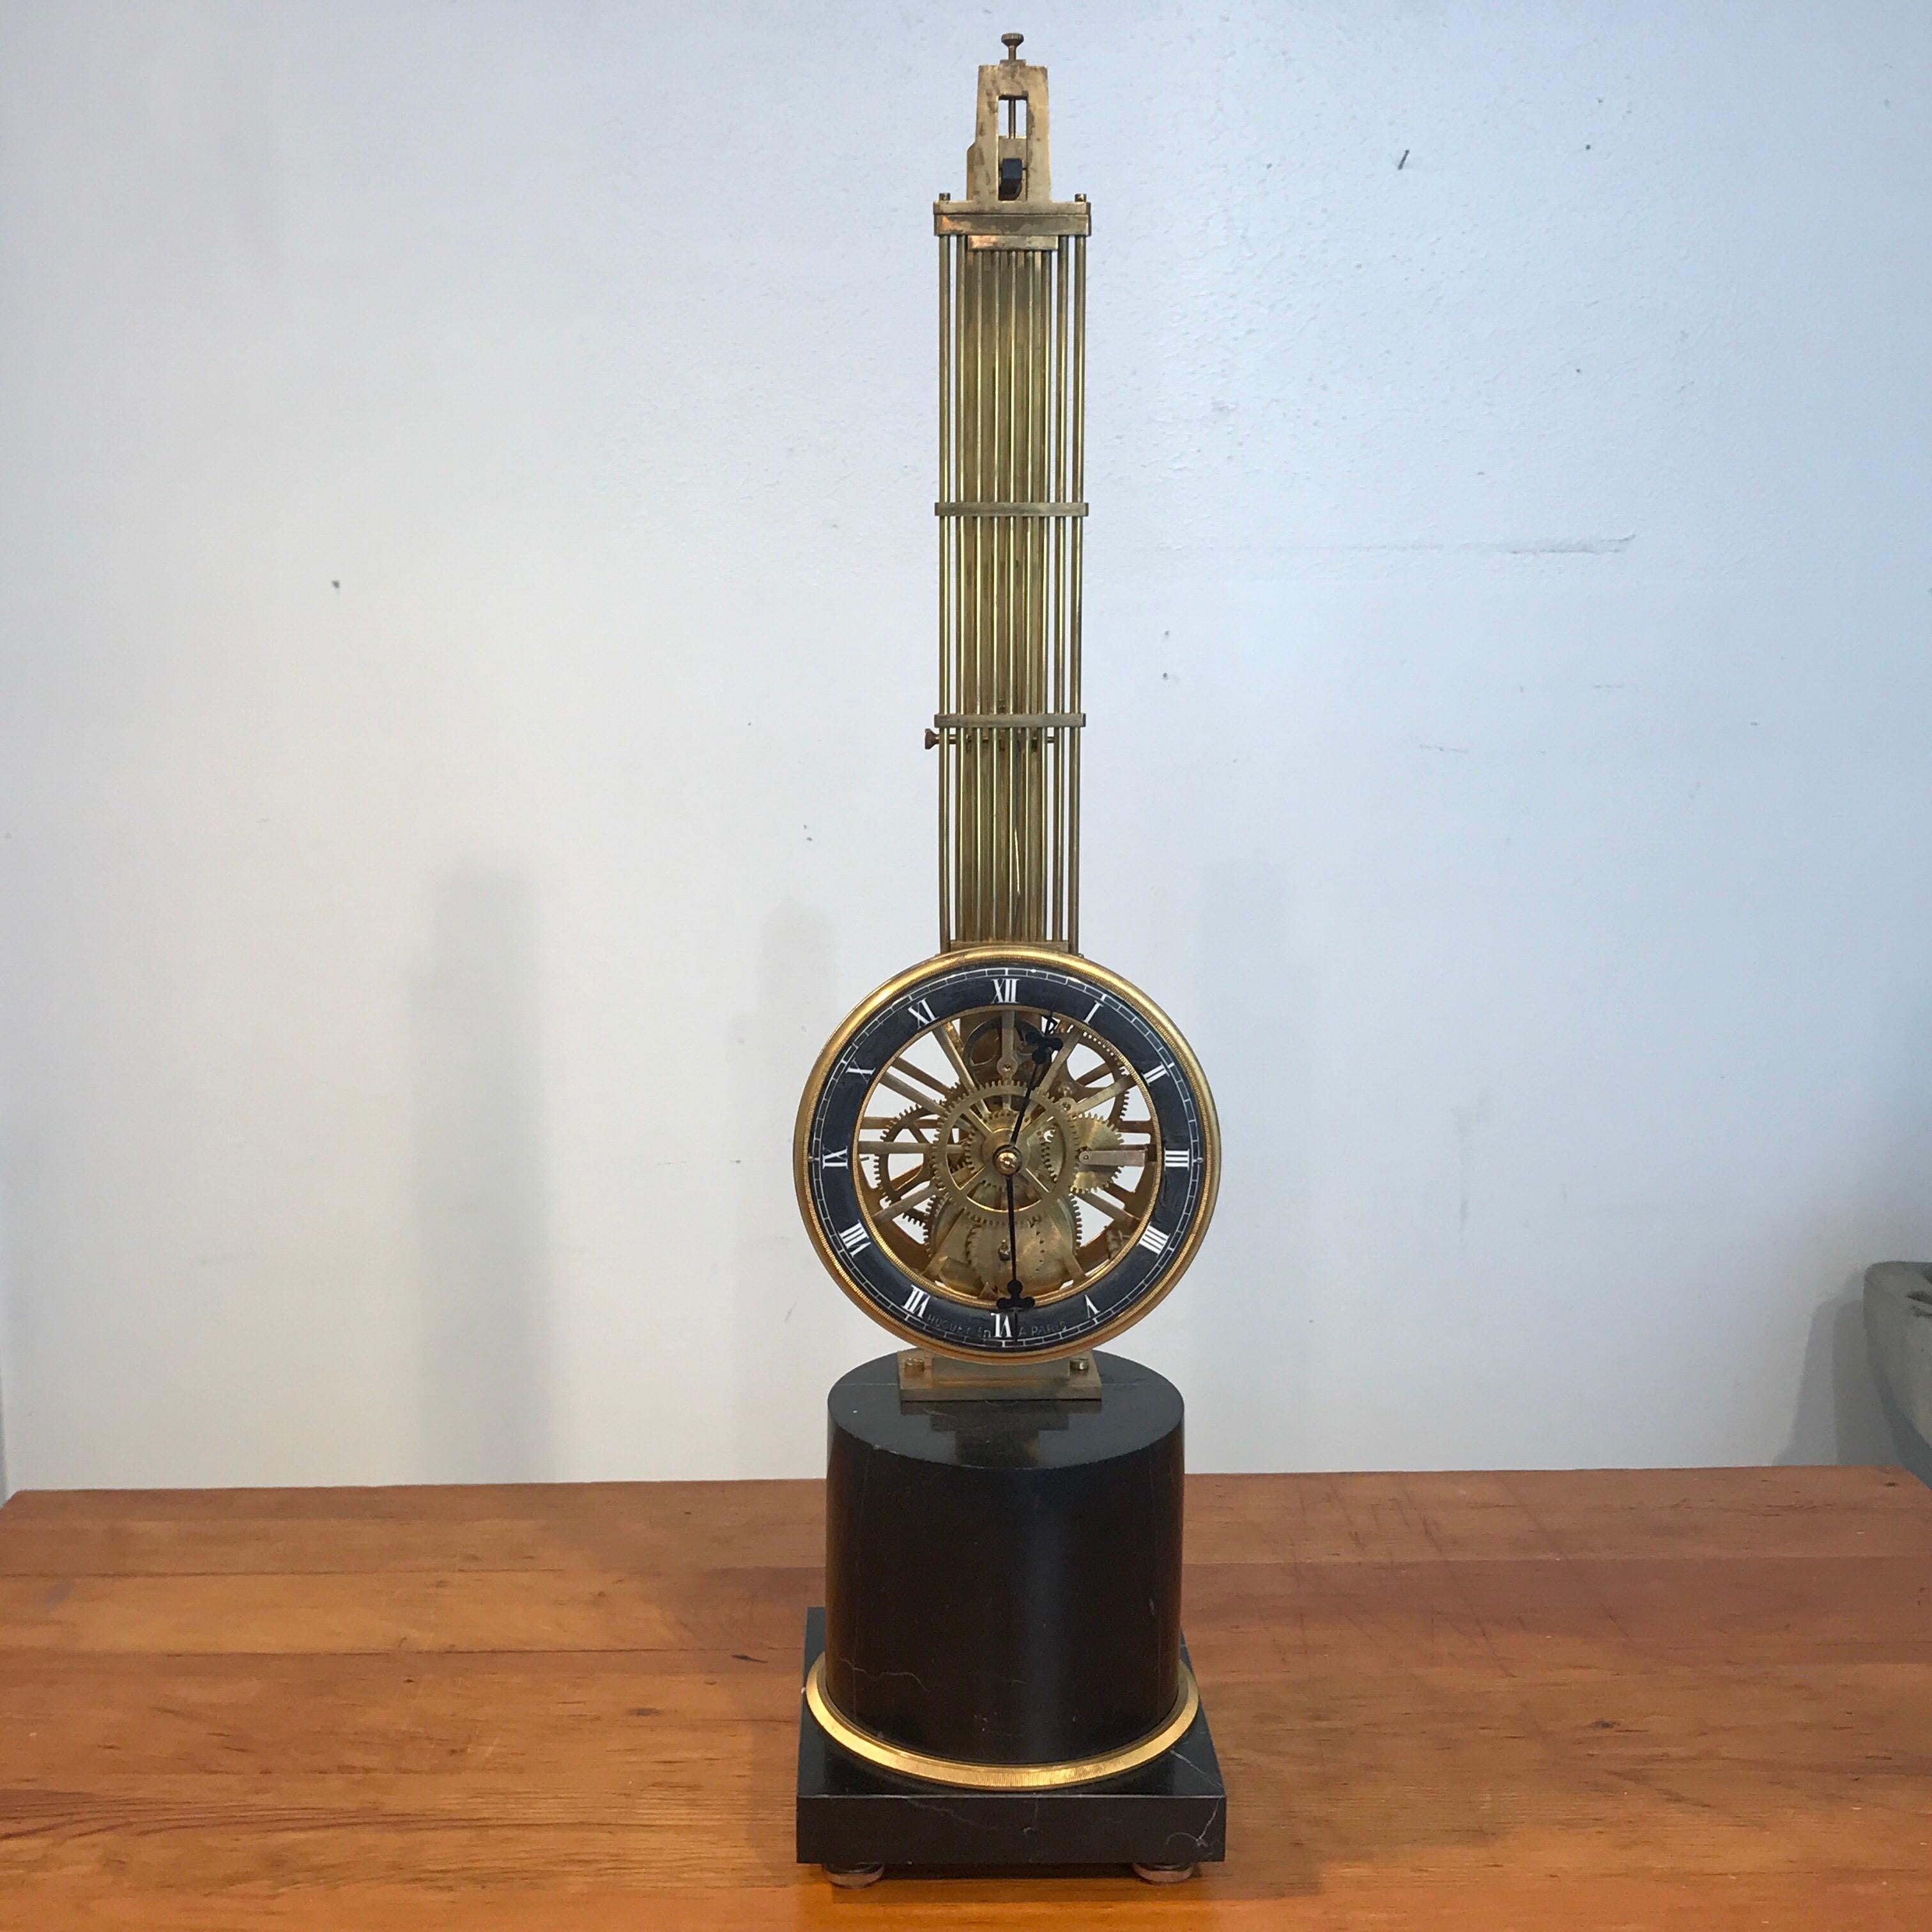 Grand tour column skeleton clock, A. Huguenin, Paris. Swinging column with exposed work and enameled dial. Raised on a footed circular ormolu-mounted marble pedestal base. Working condition. The clock stands 27 inches high, the base has 6 inch